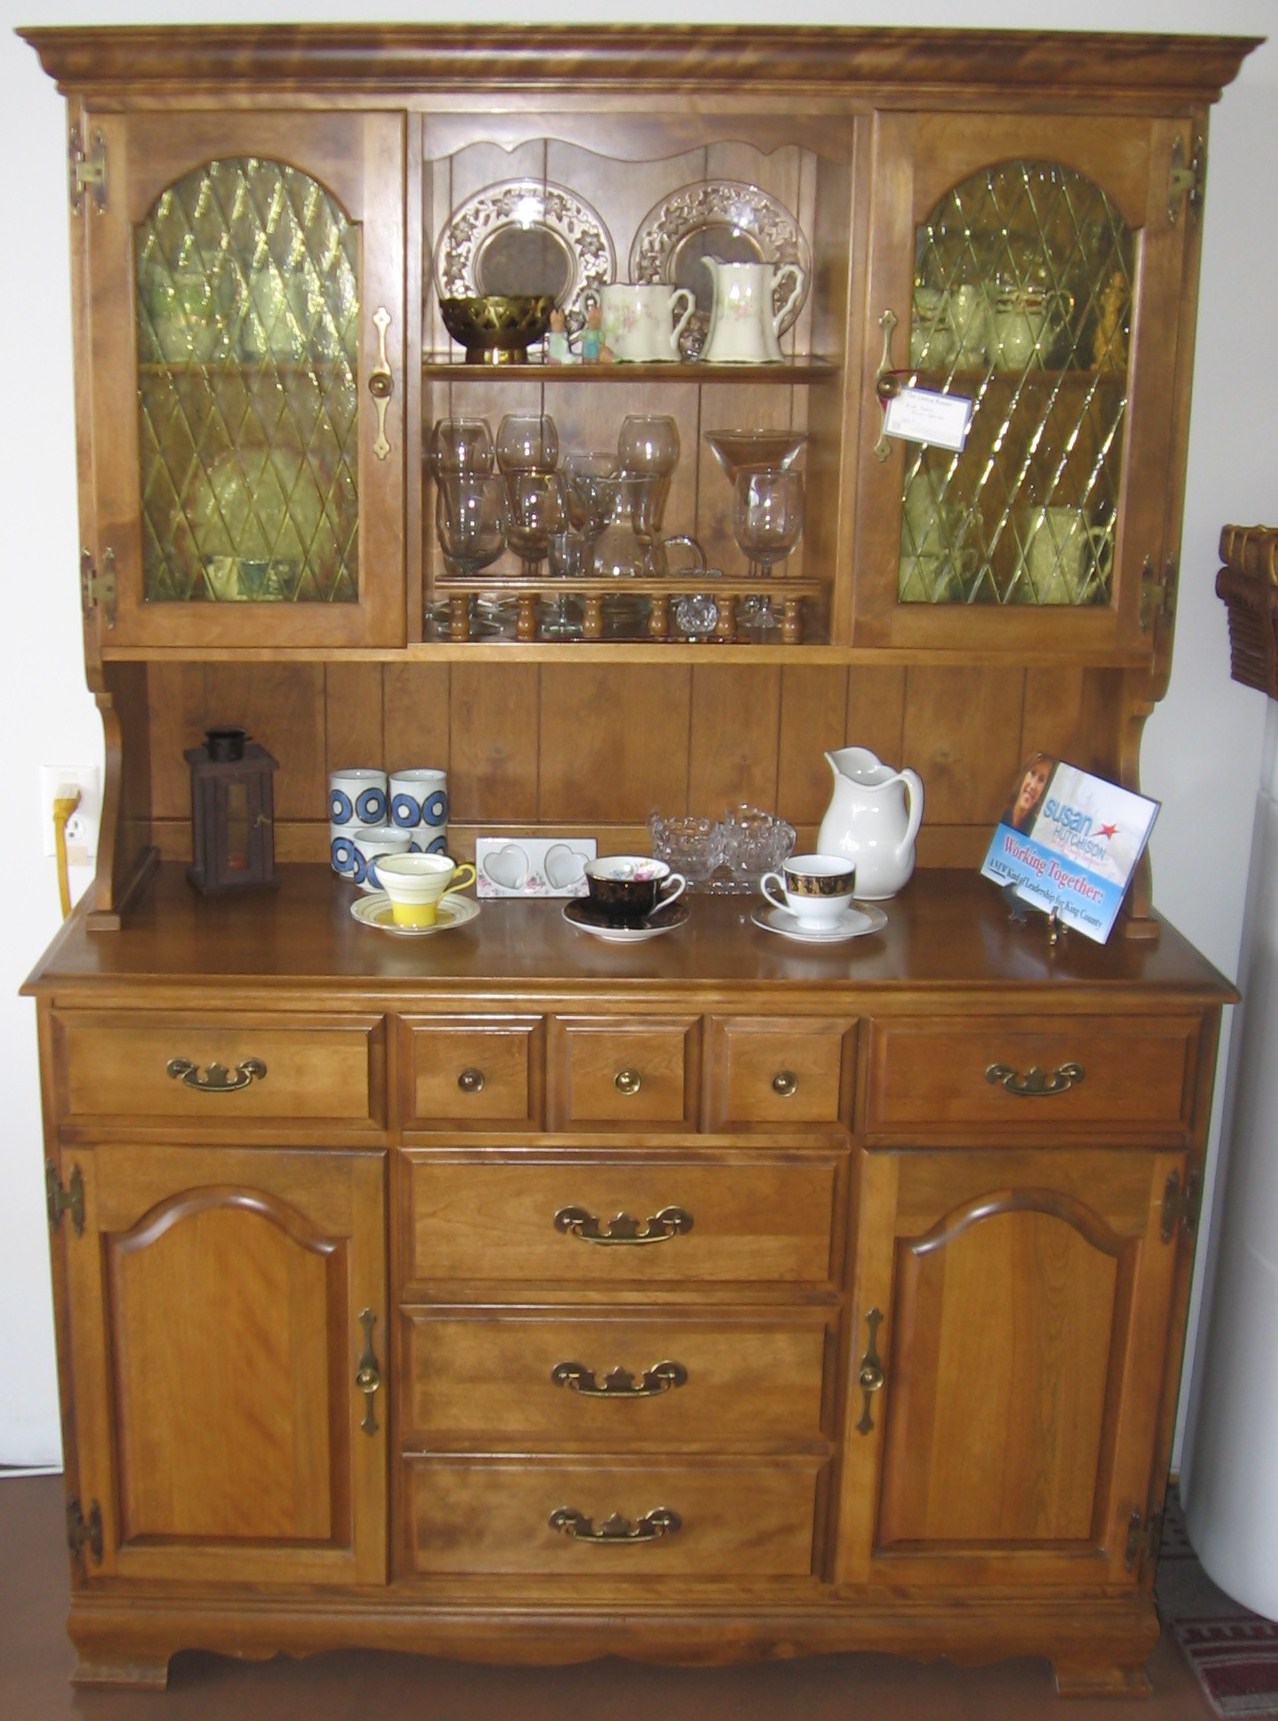 a wooden hutch has plates and cups on it